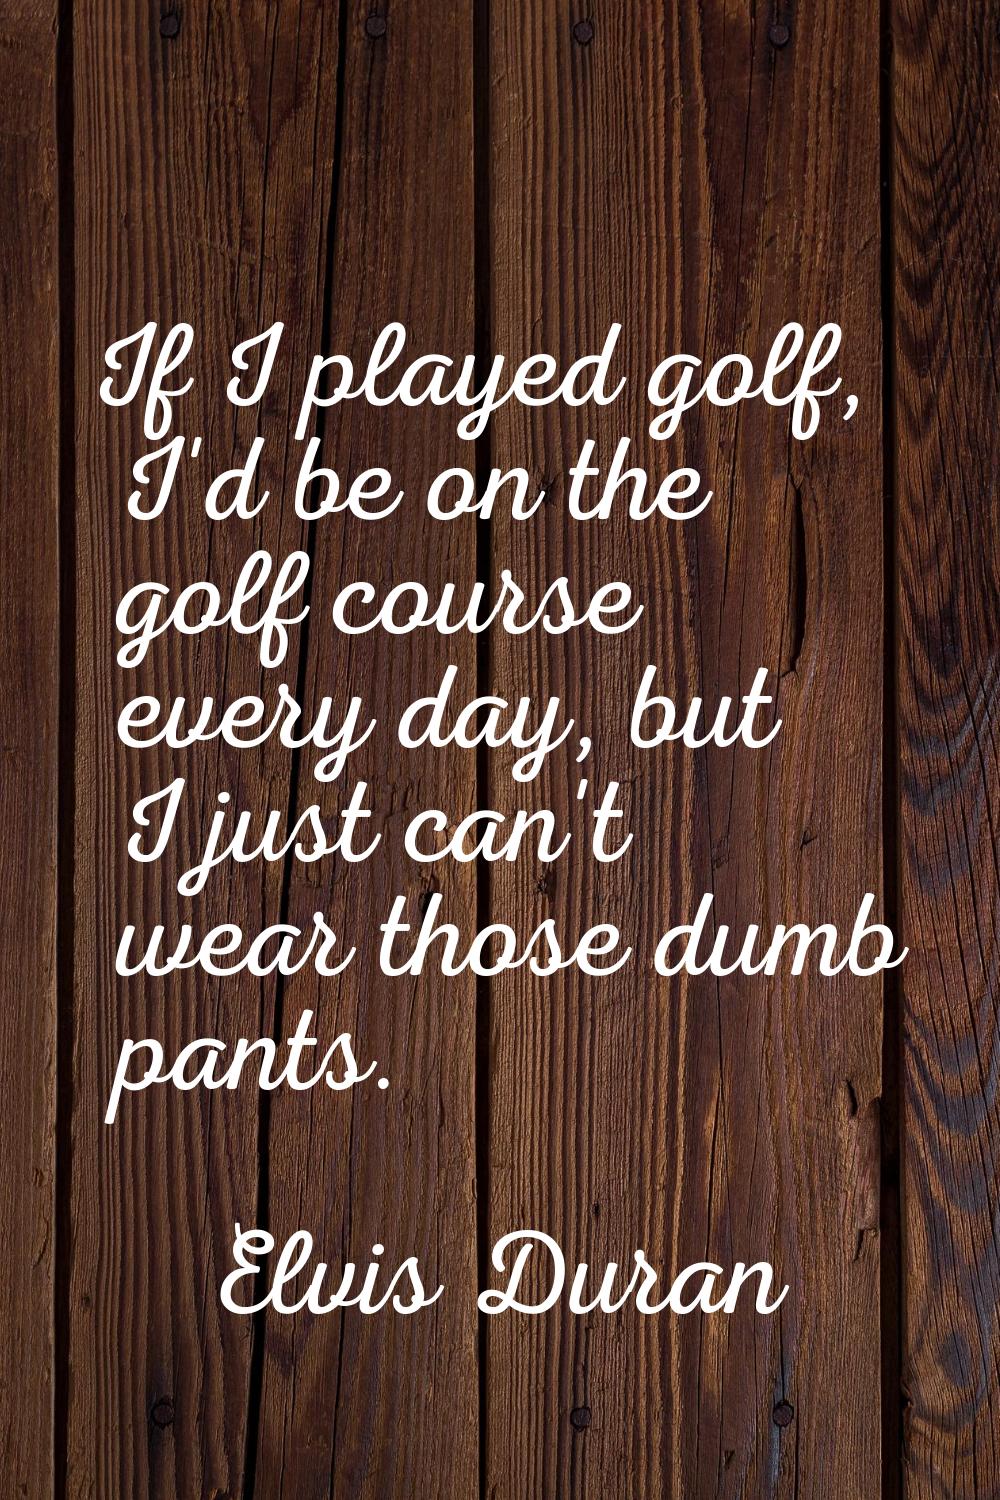 If I played golf, I'd be on the golf course every day, but I just can't wear those dumb pants.